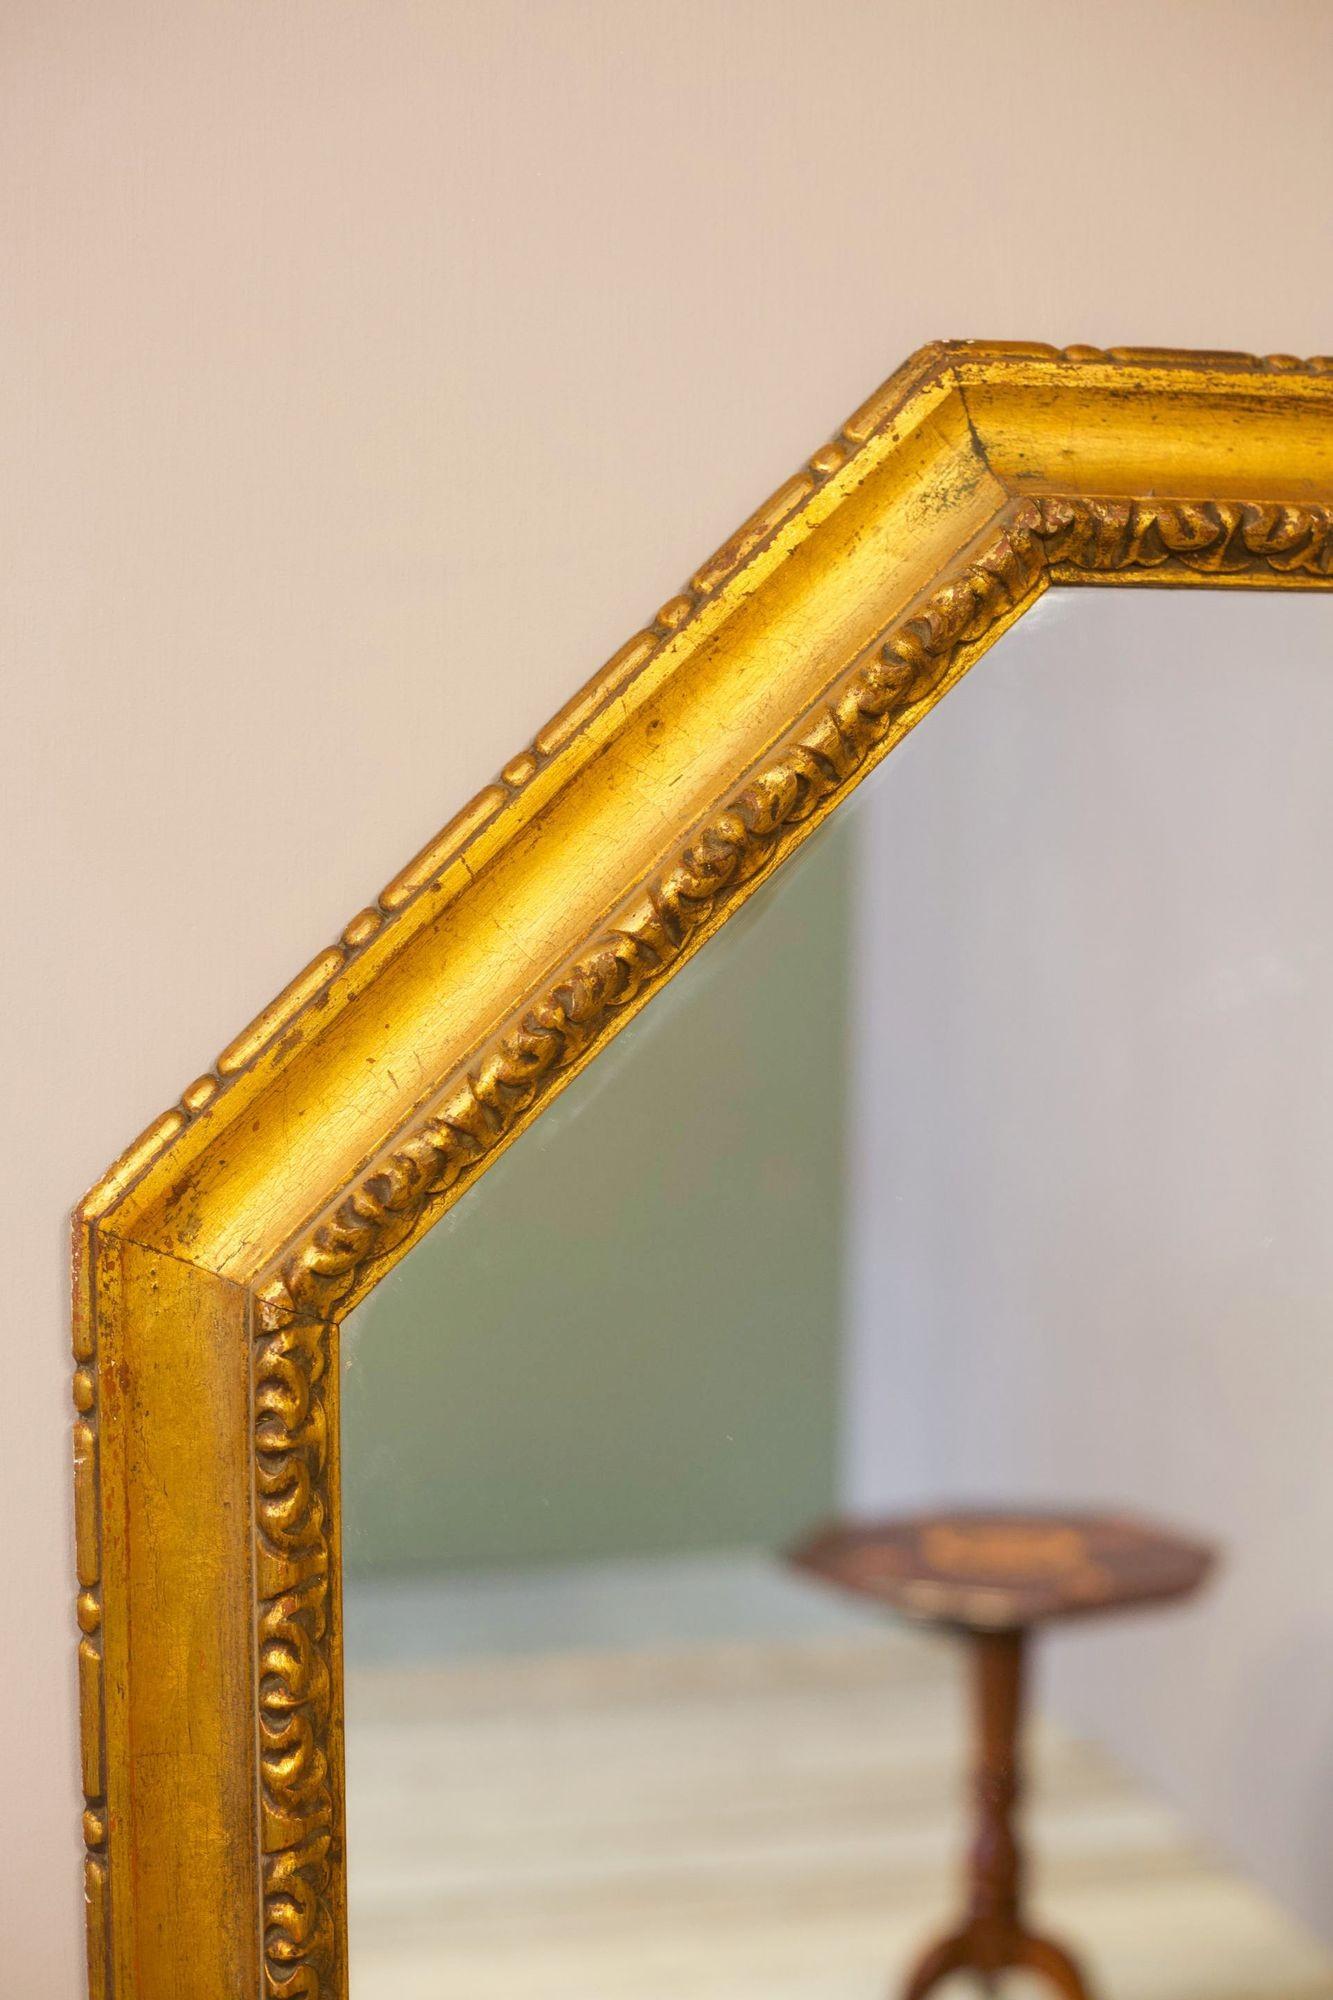 This is a very large 20th century gilt mirror. Nice aged patina to the frame and large clear mirror plate. The overall quality is very good with no major faults. It can be hung either portrait or landscape. The frame has very attractive moulded